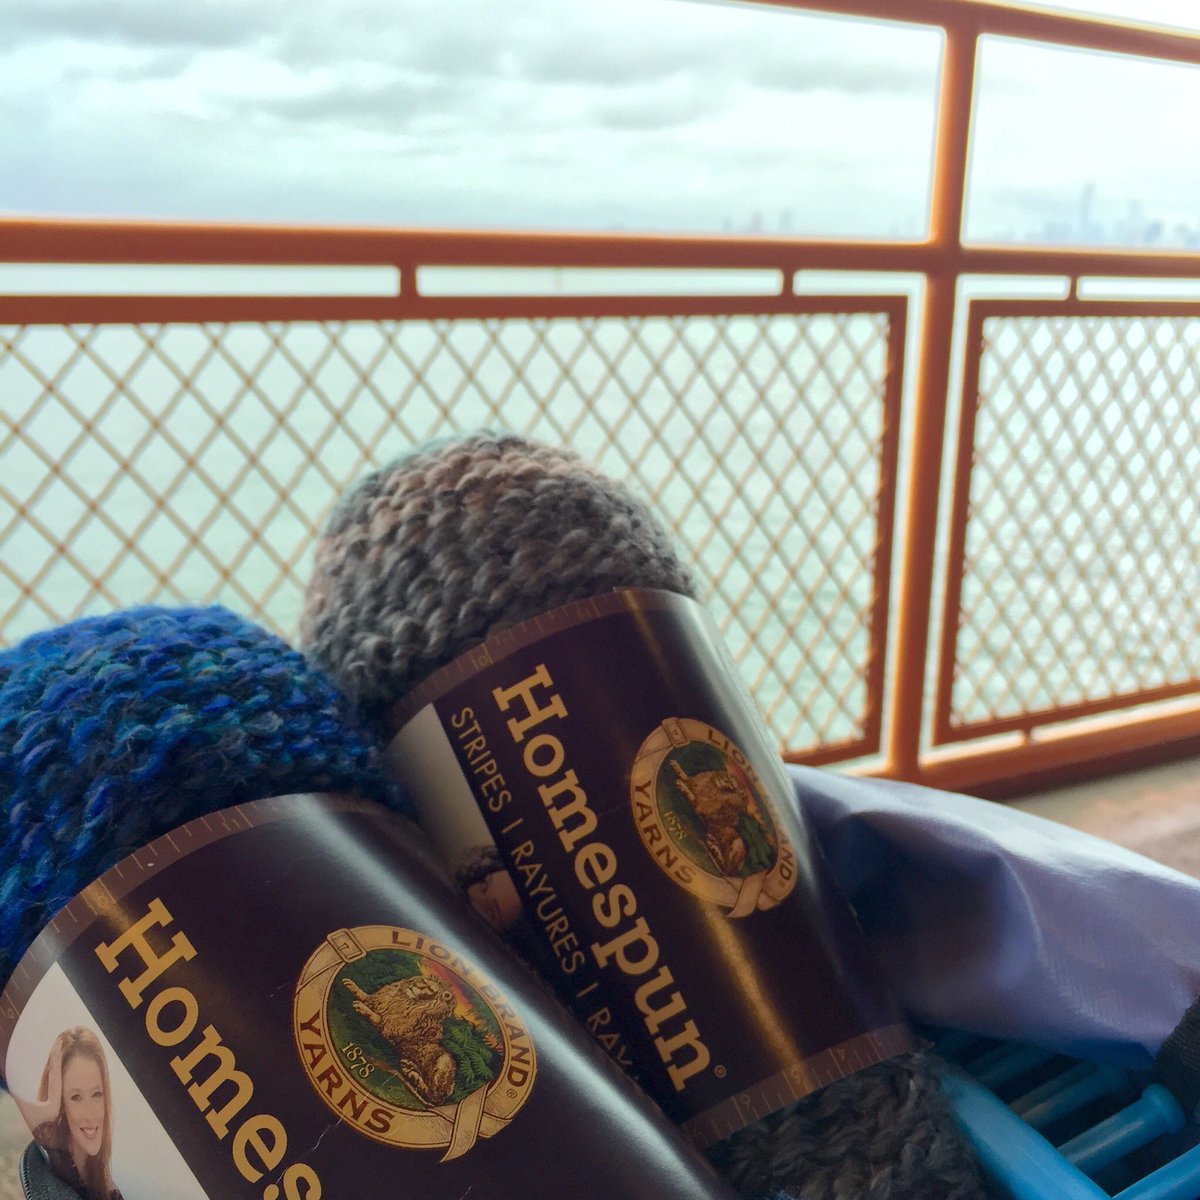 Taking the ferry into Manhattan today. Why not spend that time #loomknitting? We need a few more scarves to successfully complete our #ScarvesForSailors campaign so we’re knitting every chance we get ⛴🇺🇸❤️

#SupportOurSailors #USSVirginia #thankyouforyourservice